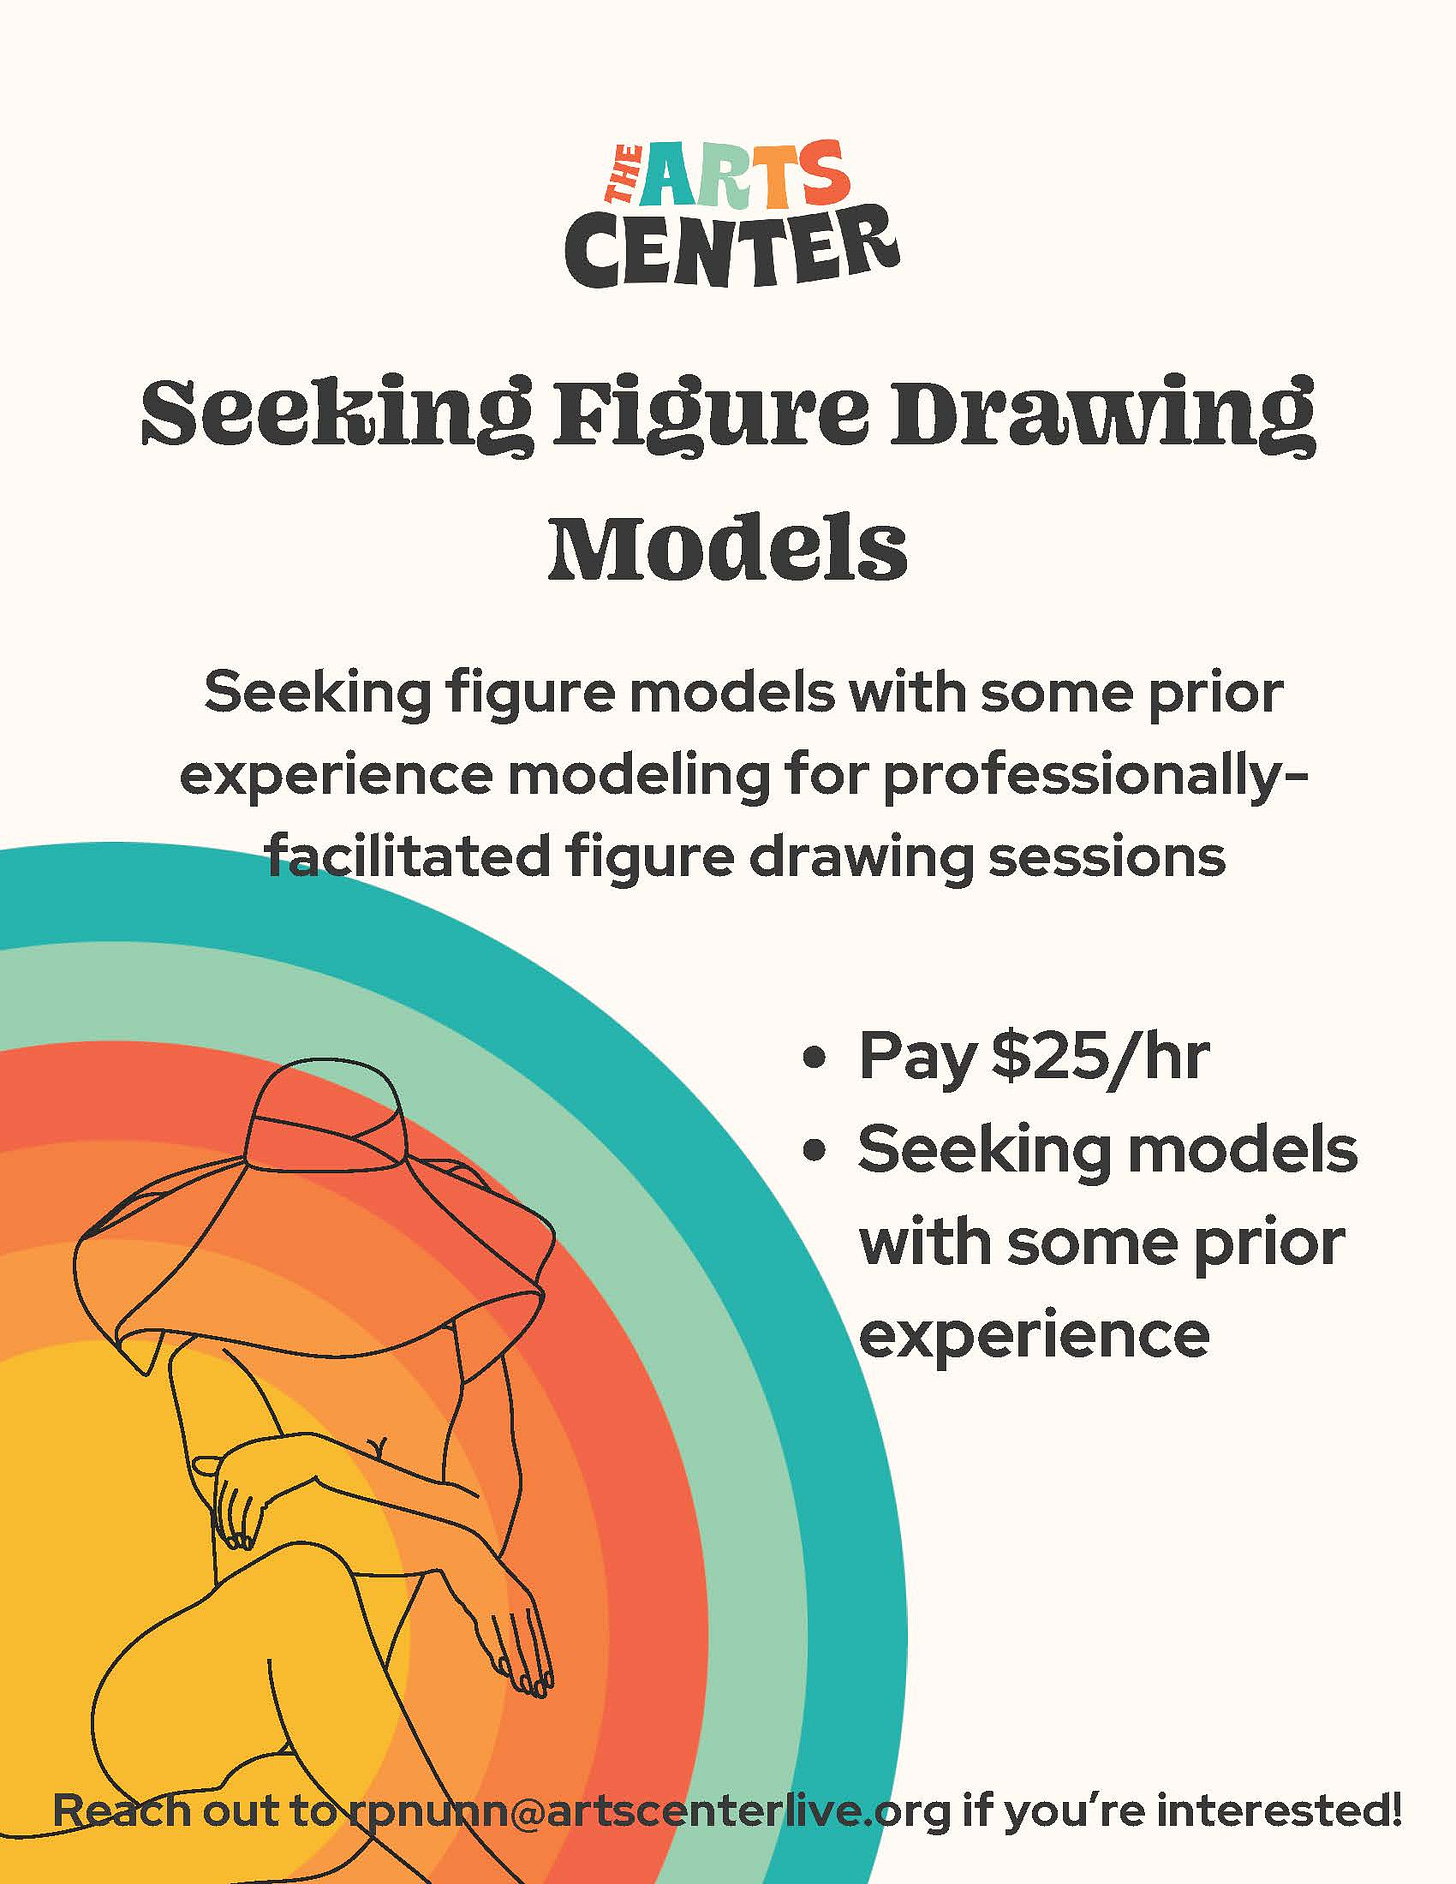 ArtsCenter Poster "Seeking Figure Drawing Models", Pay $25/hour, Seeing models with some prior experience for professionally-facilitated figure drawing sessions. Reach out to rpnun@artscenterlive.org if interested!